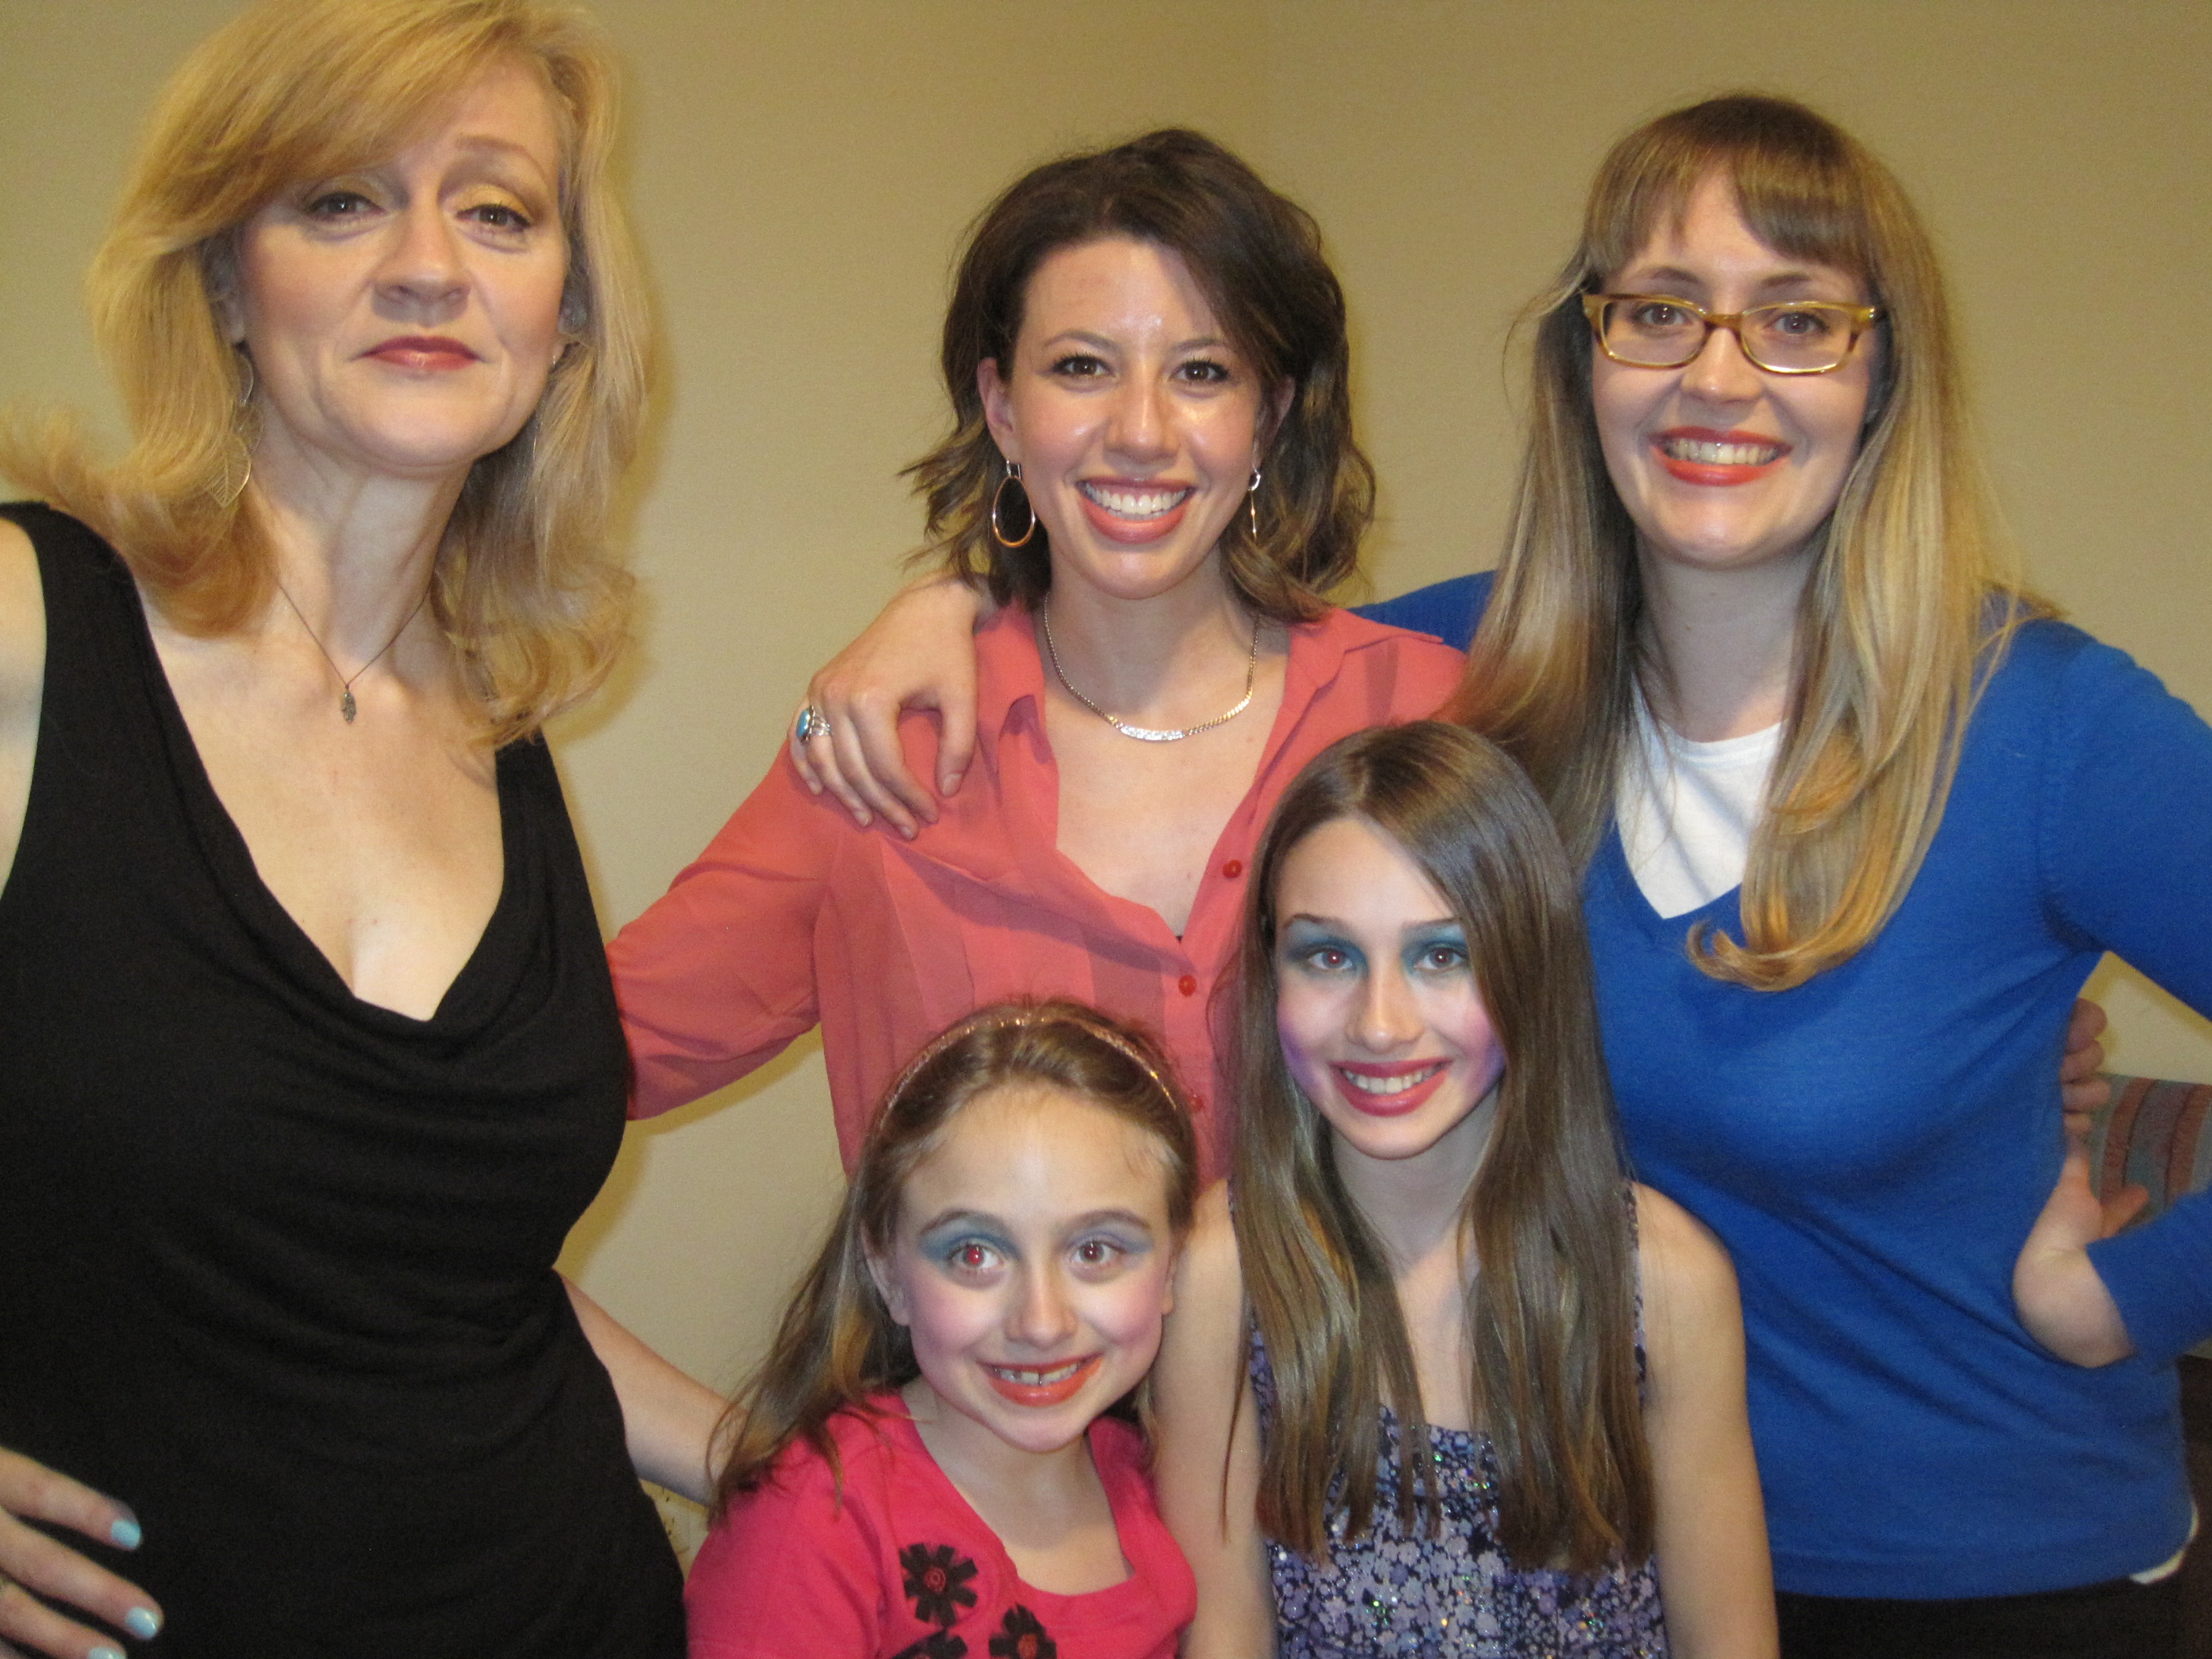 Kylie with the cast of Sitting on Babies webseries -Jane Blass, writers/stars Brooke Jacob & Becky Whittemore, and Megan Trageser.